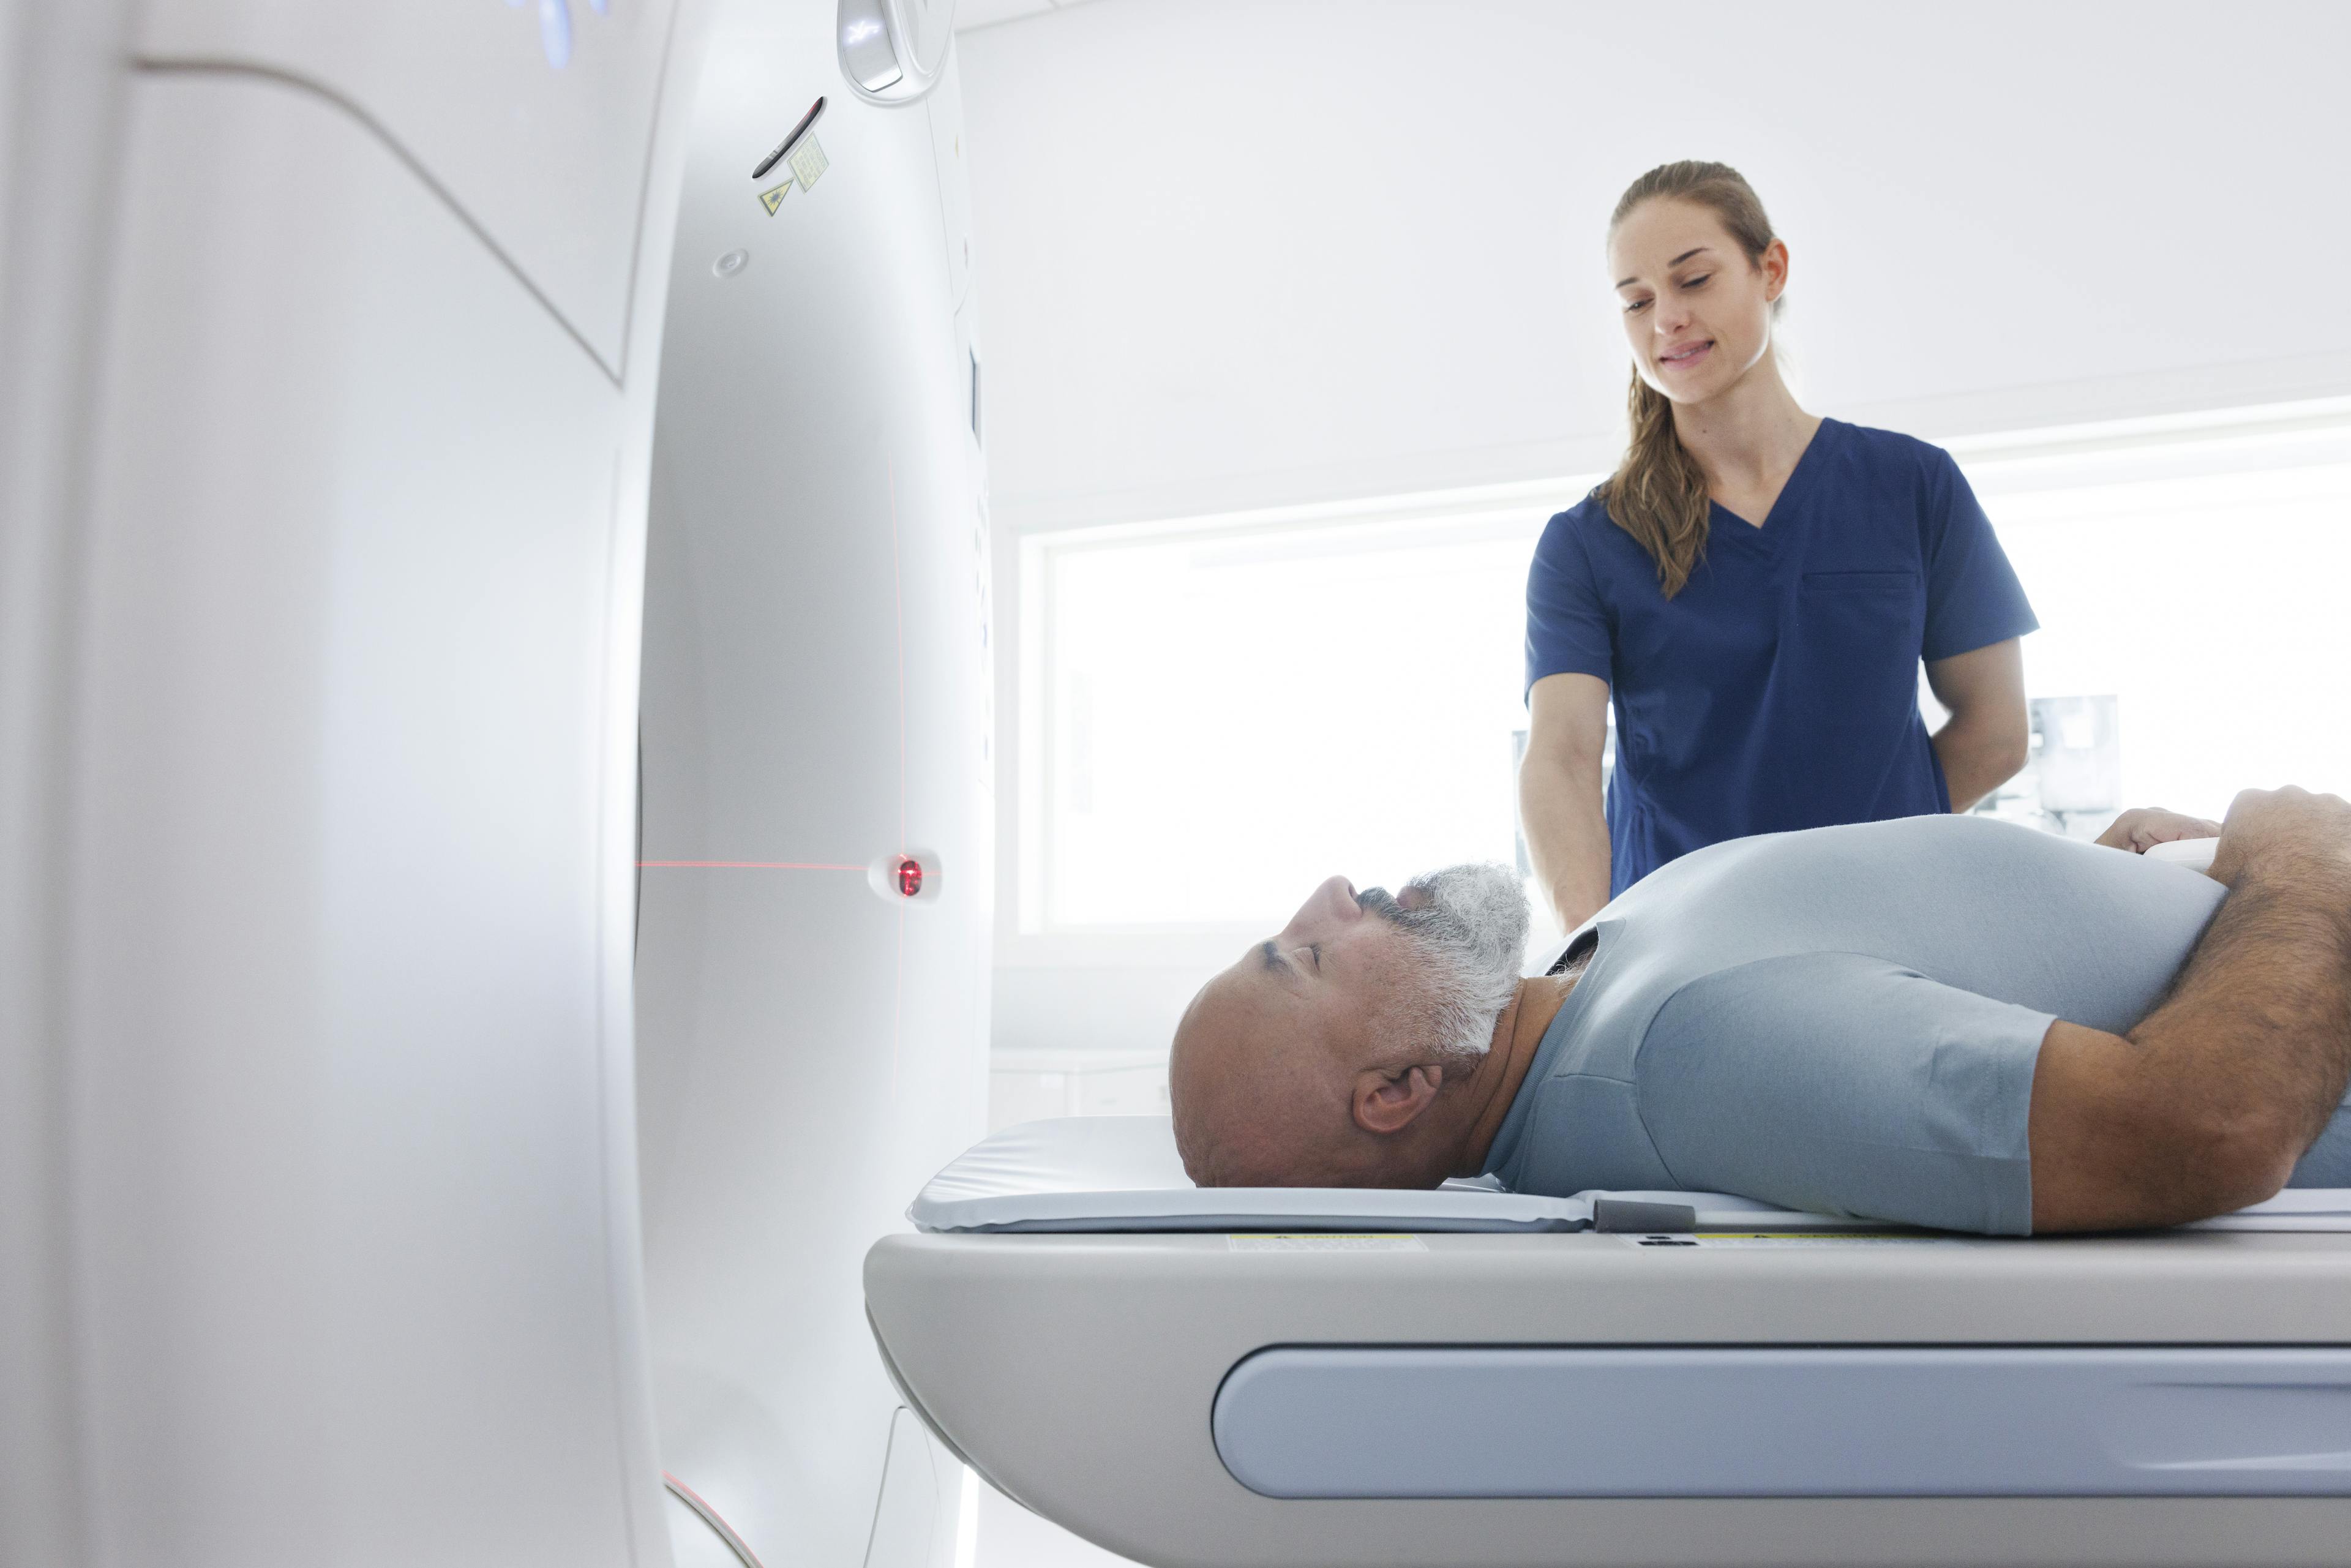 Patient in CT scanner with staff 1370321304.jpg